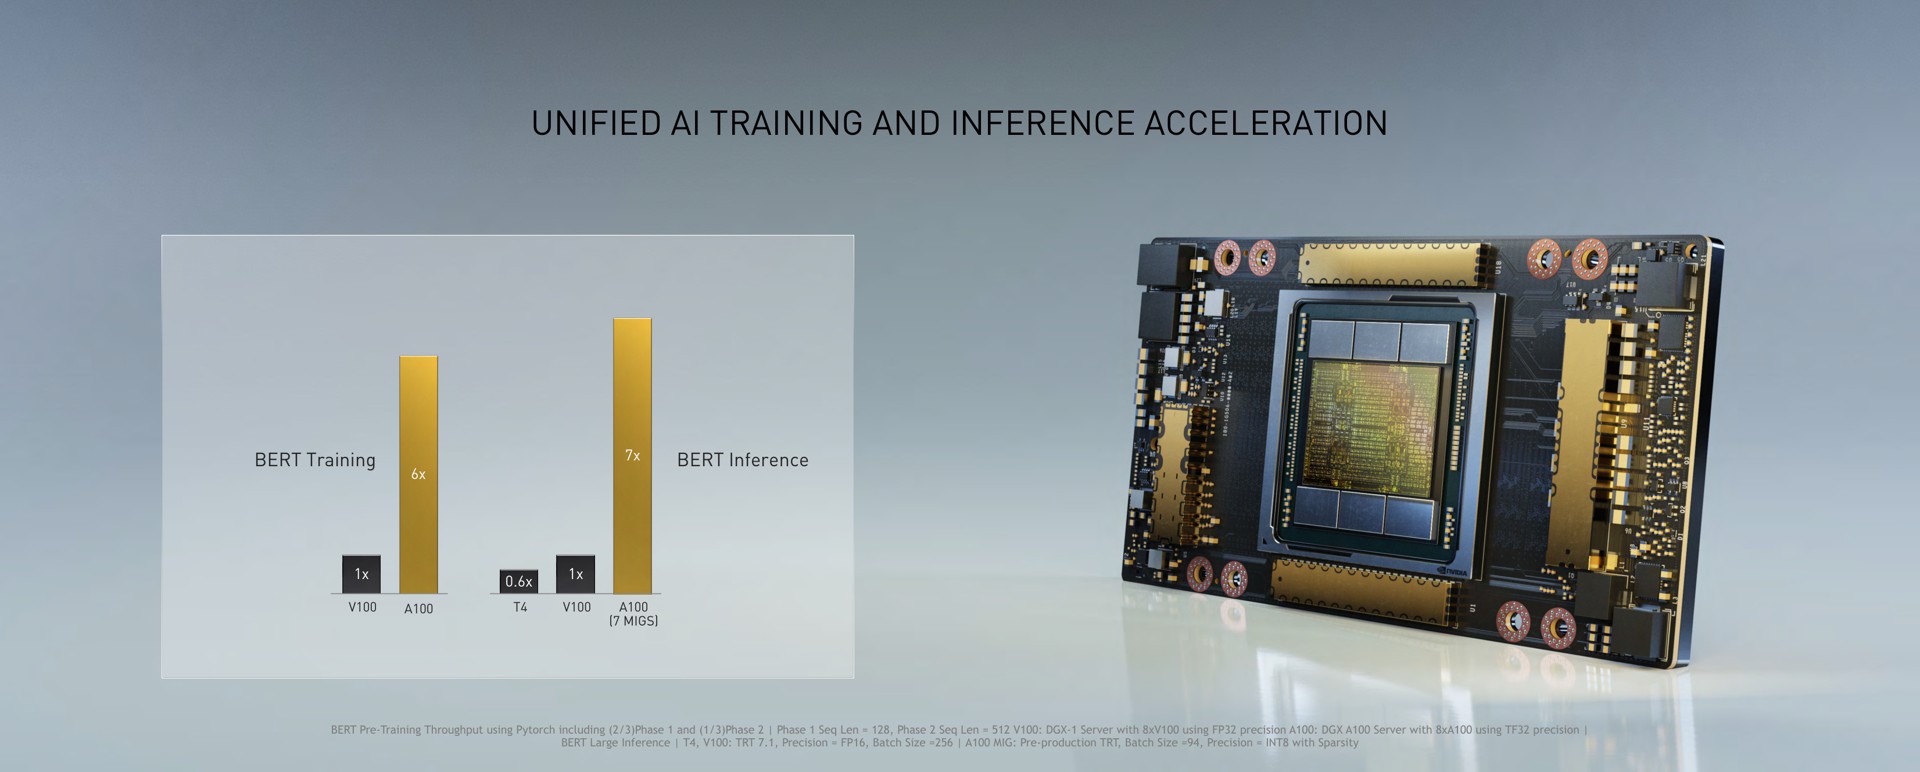 unified training and inference acceleration | NVIDIA